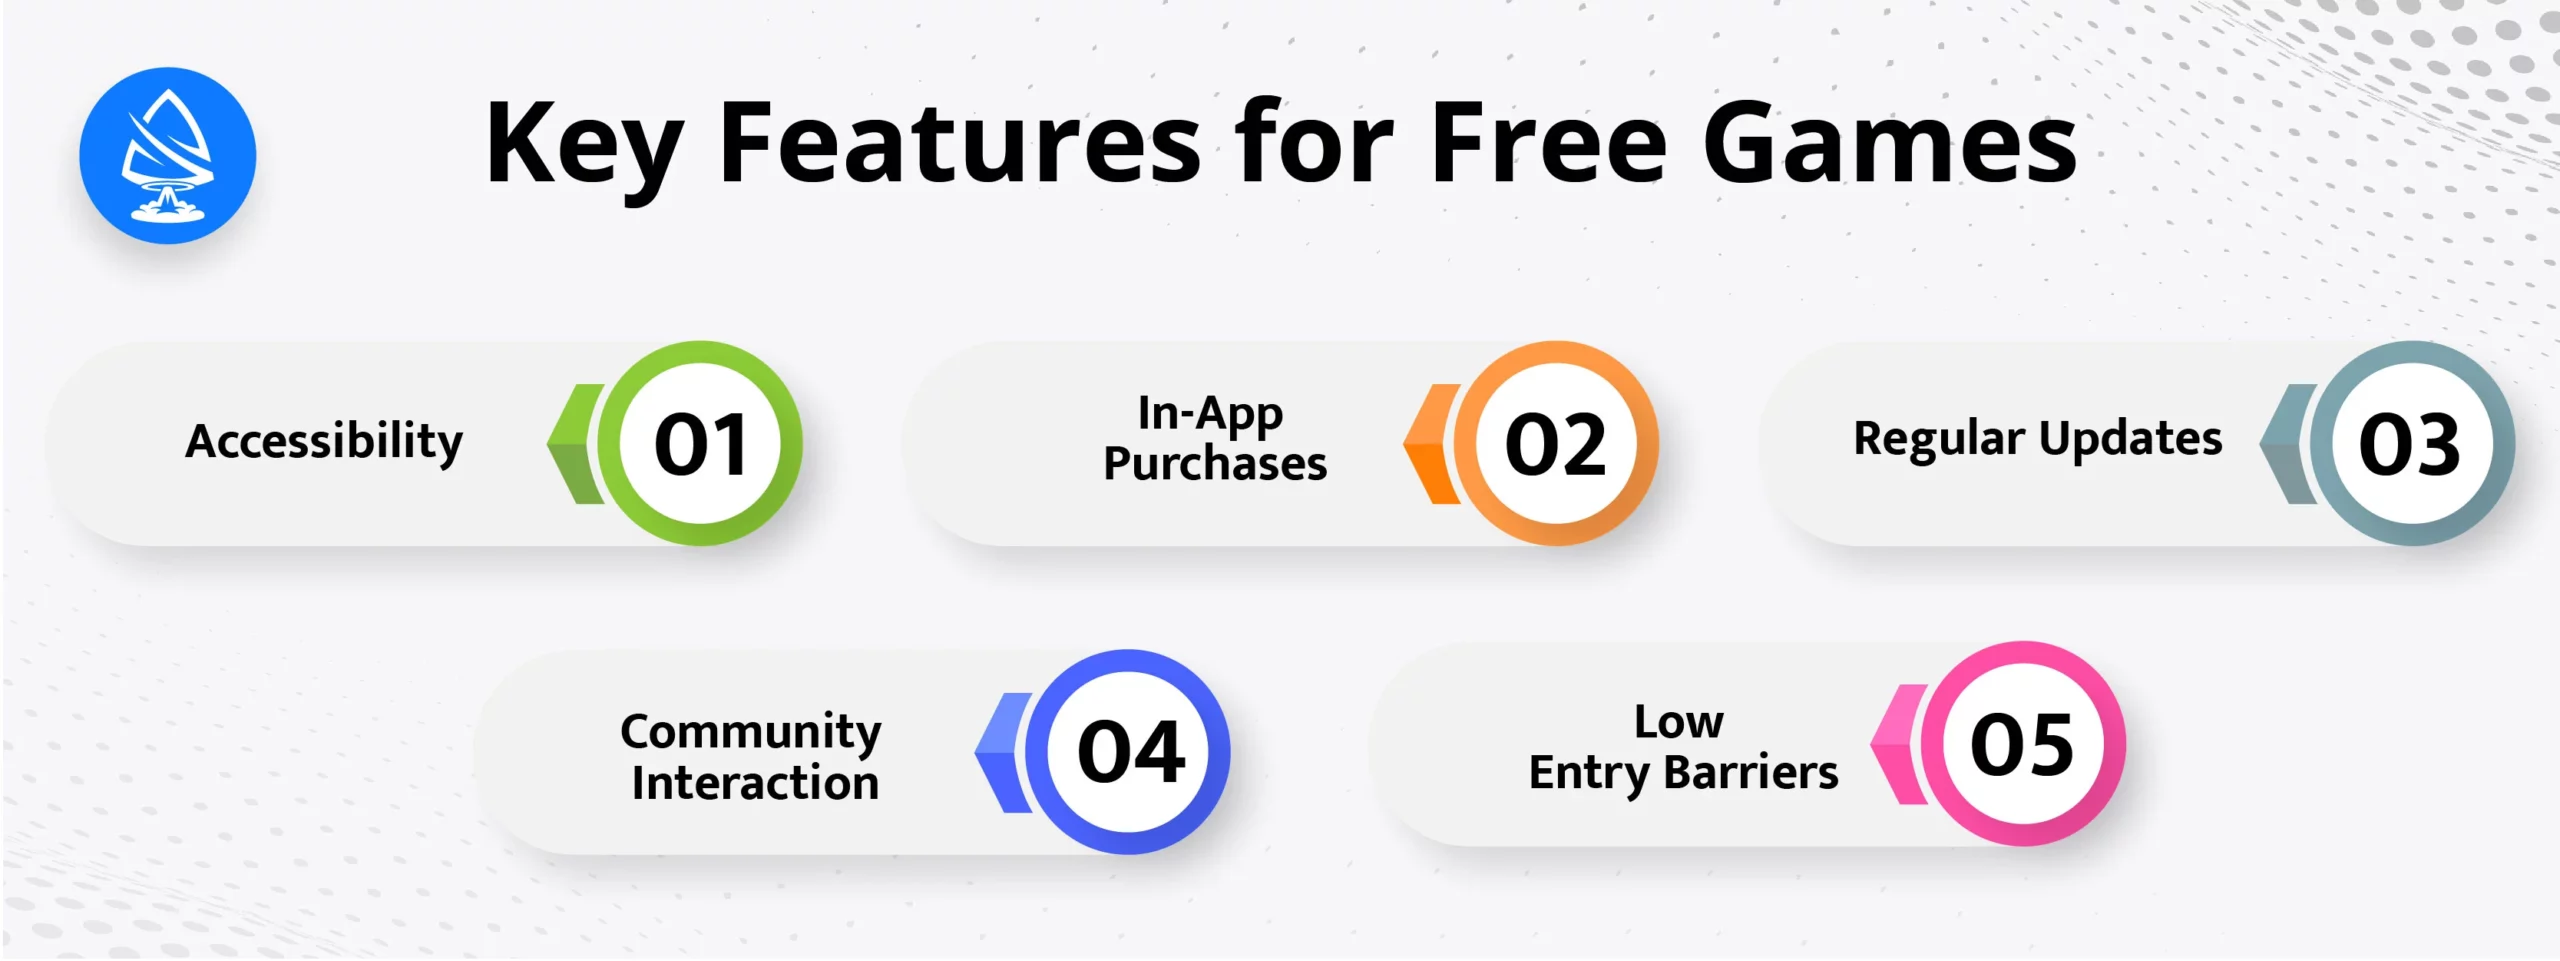 Key features that attract users to free games